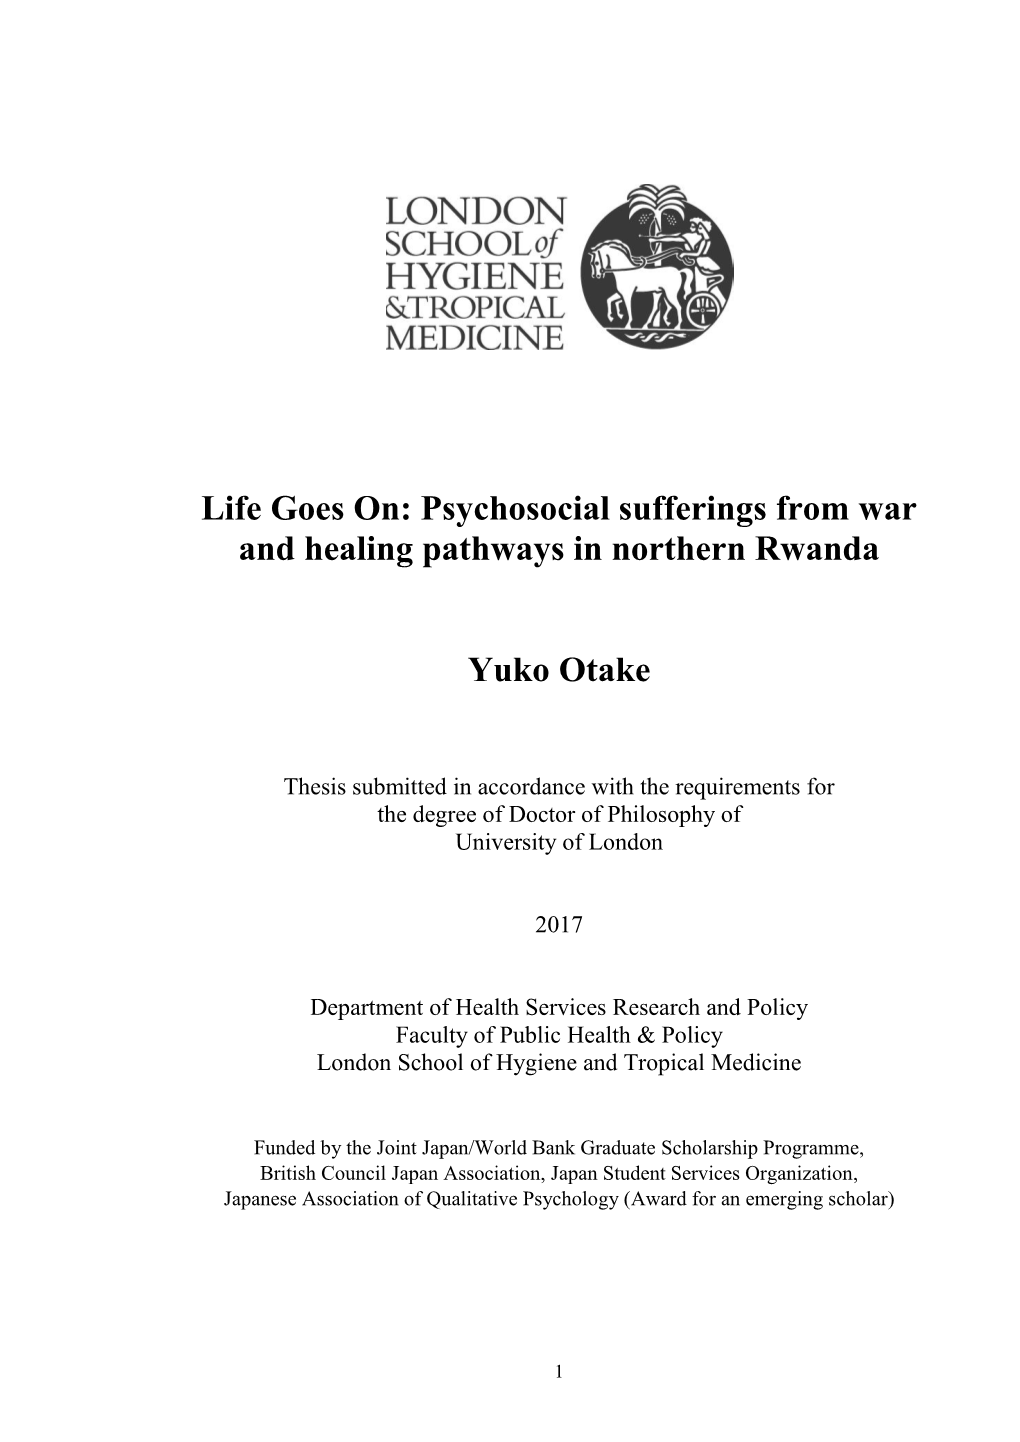 Life Goes On: Psychosocial Sufferings from War and Healing Pathways in Northern Rwanda